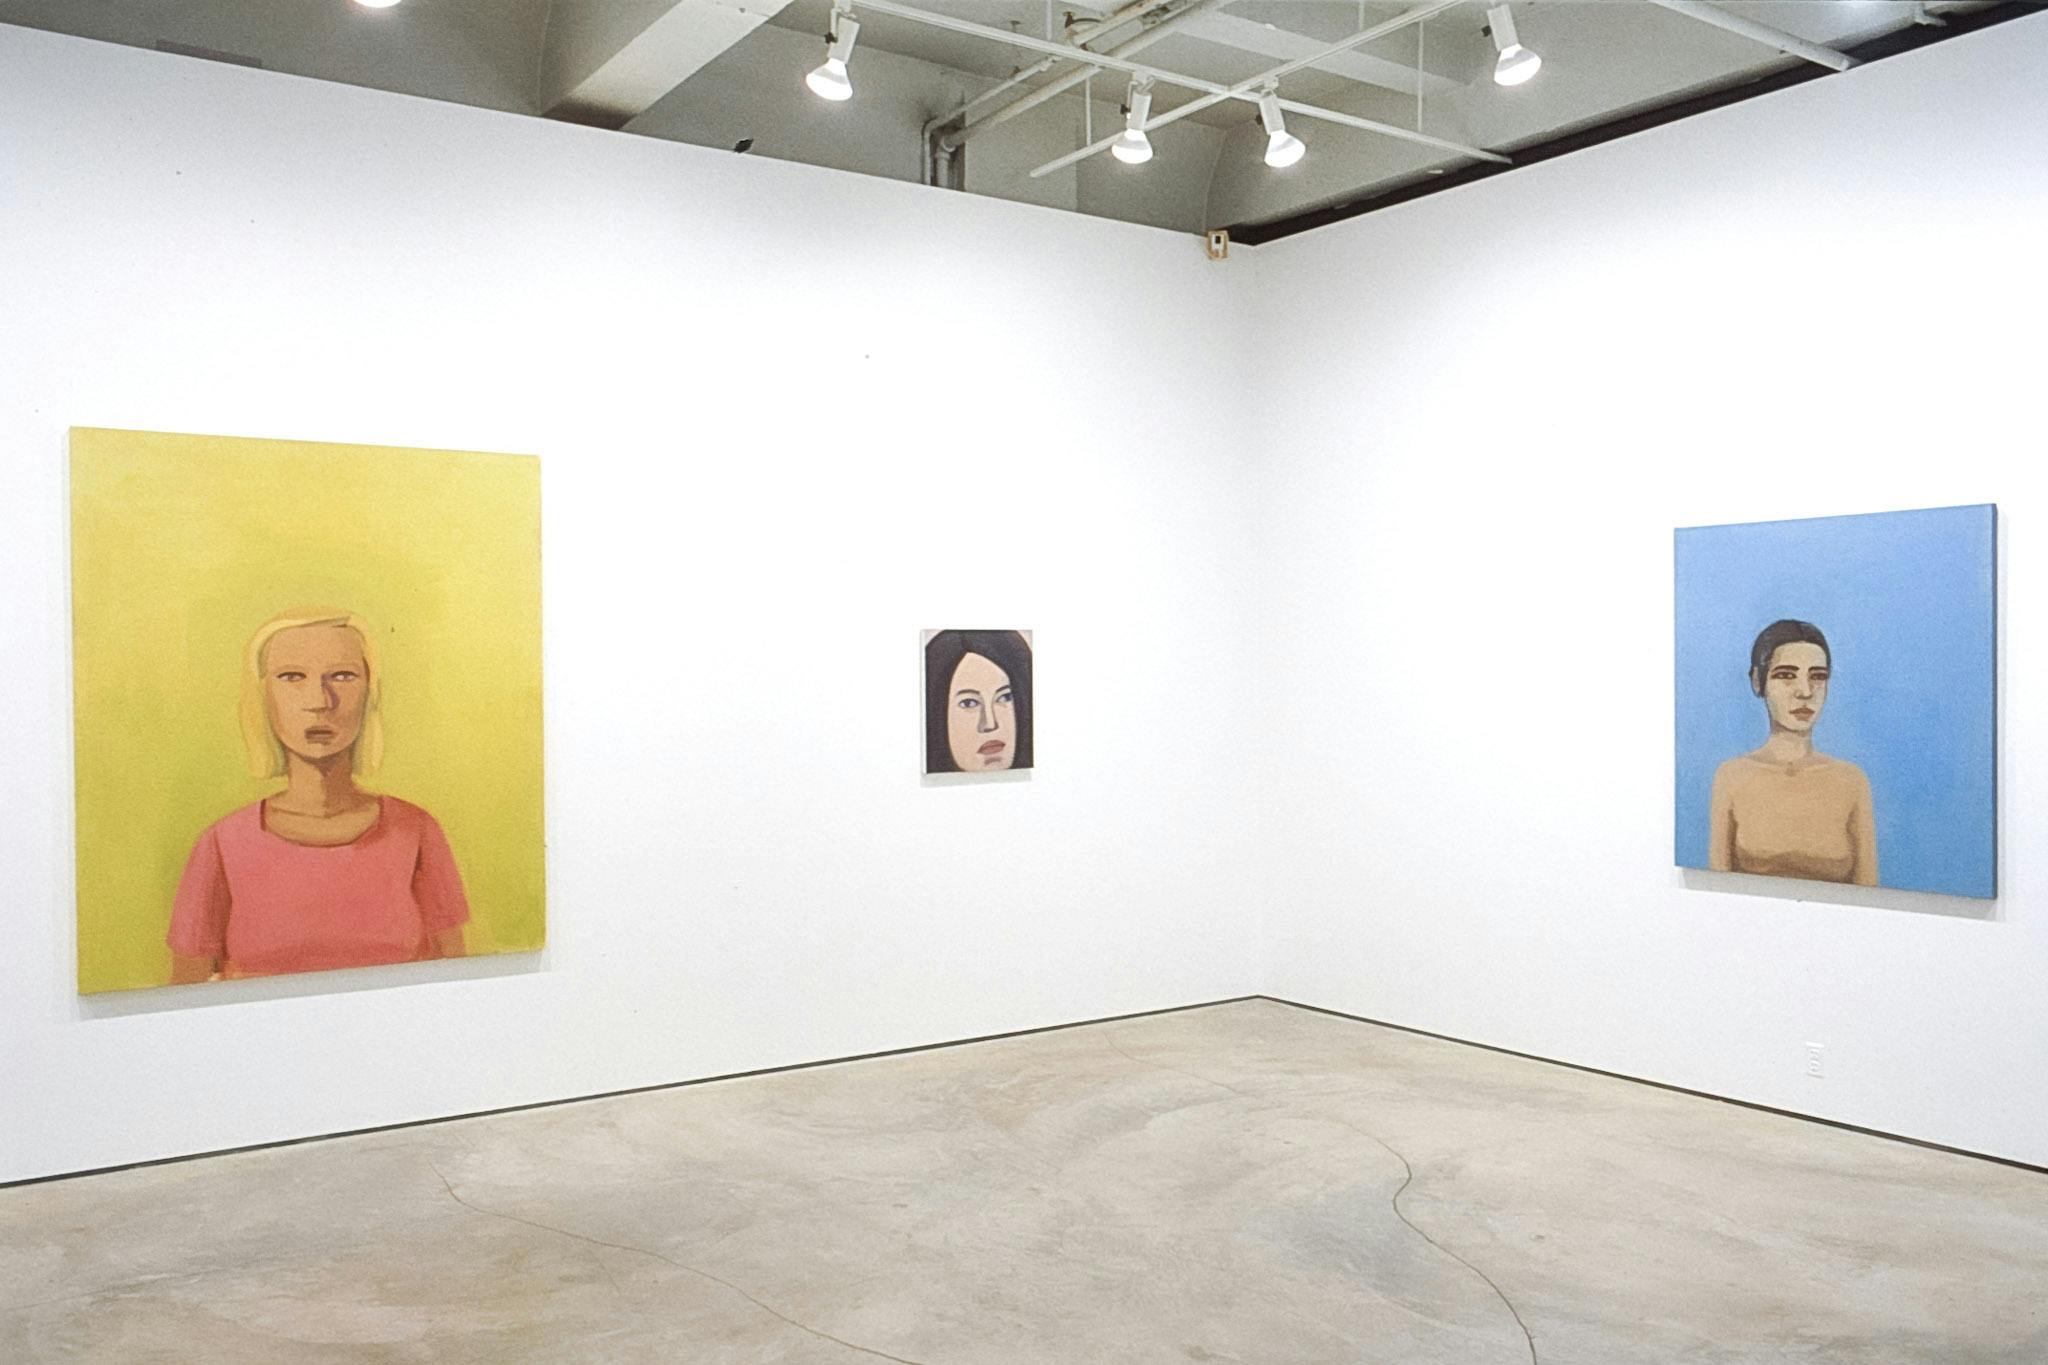 Three portrait paintings are exhibited on the galley walls. The left one is a woman in the yellow background. The middle one is a close-up of a woman’s face. The one on the right is blue. 